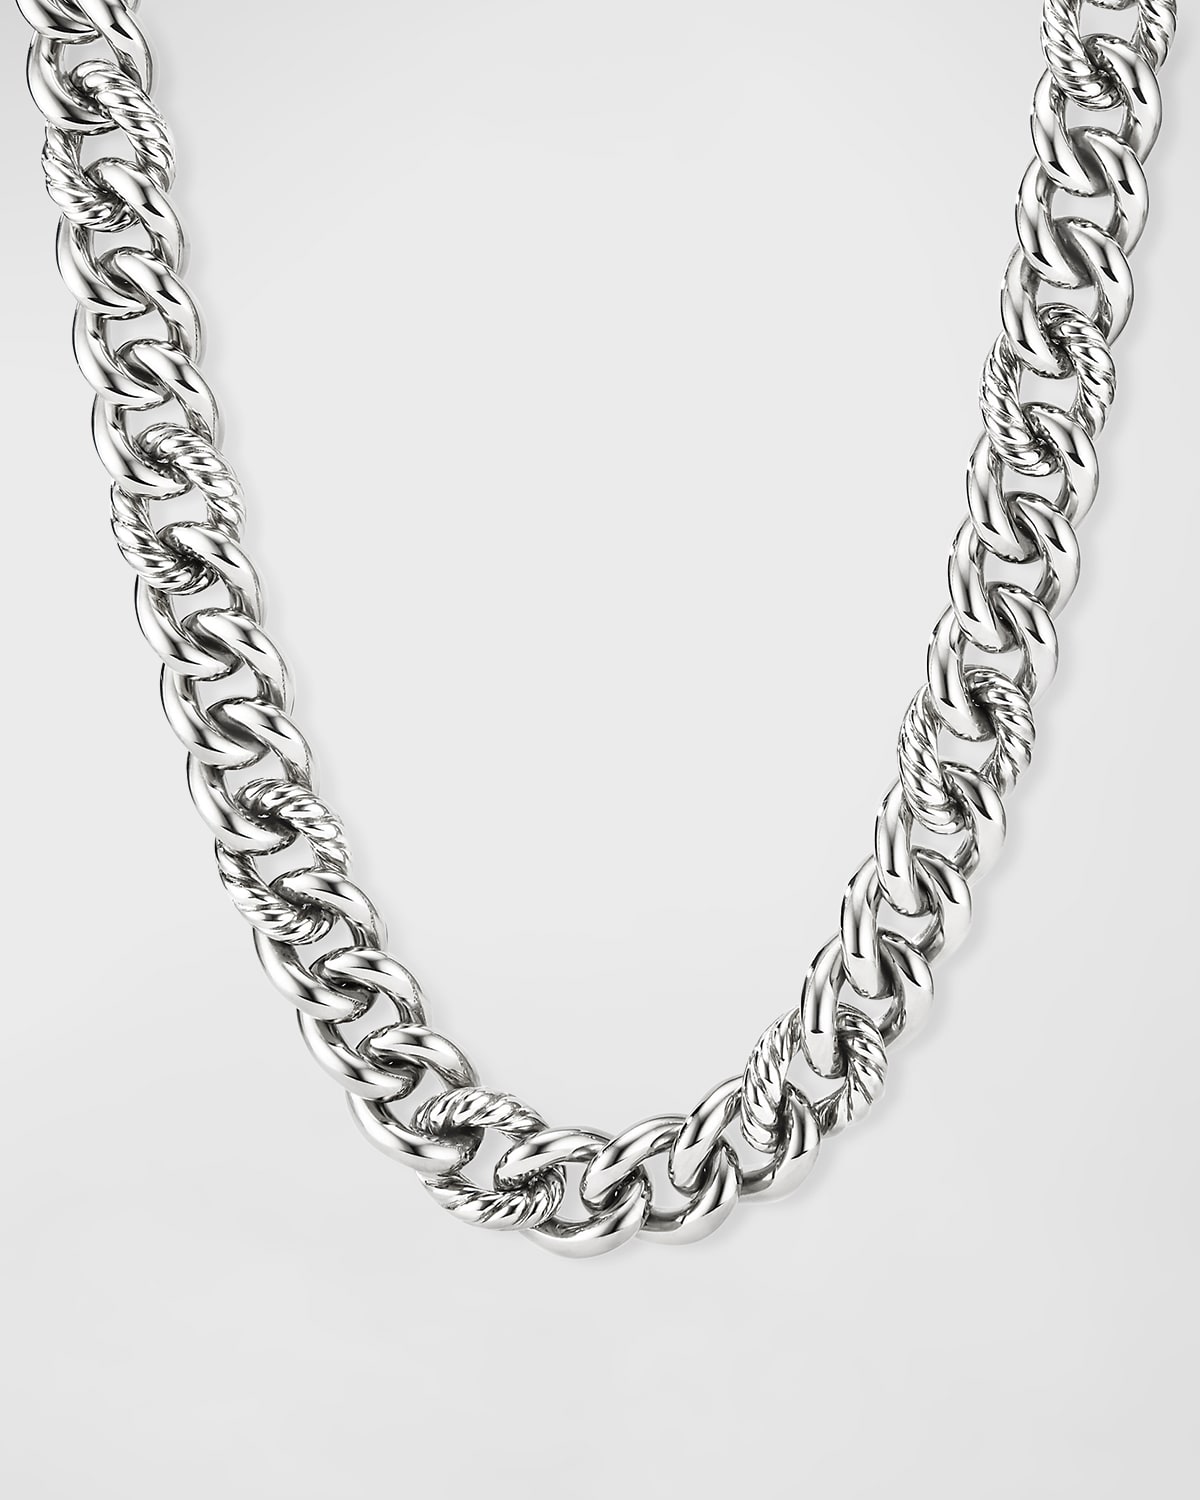 Jewel Tie 925 Sterling Silver 8mm Close Link Flat Cuban Curb Chain Necklace with Secure Lobster Lock Clasp